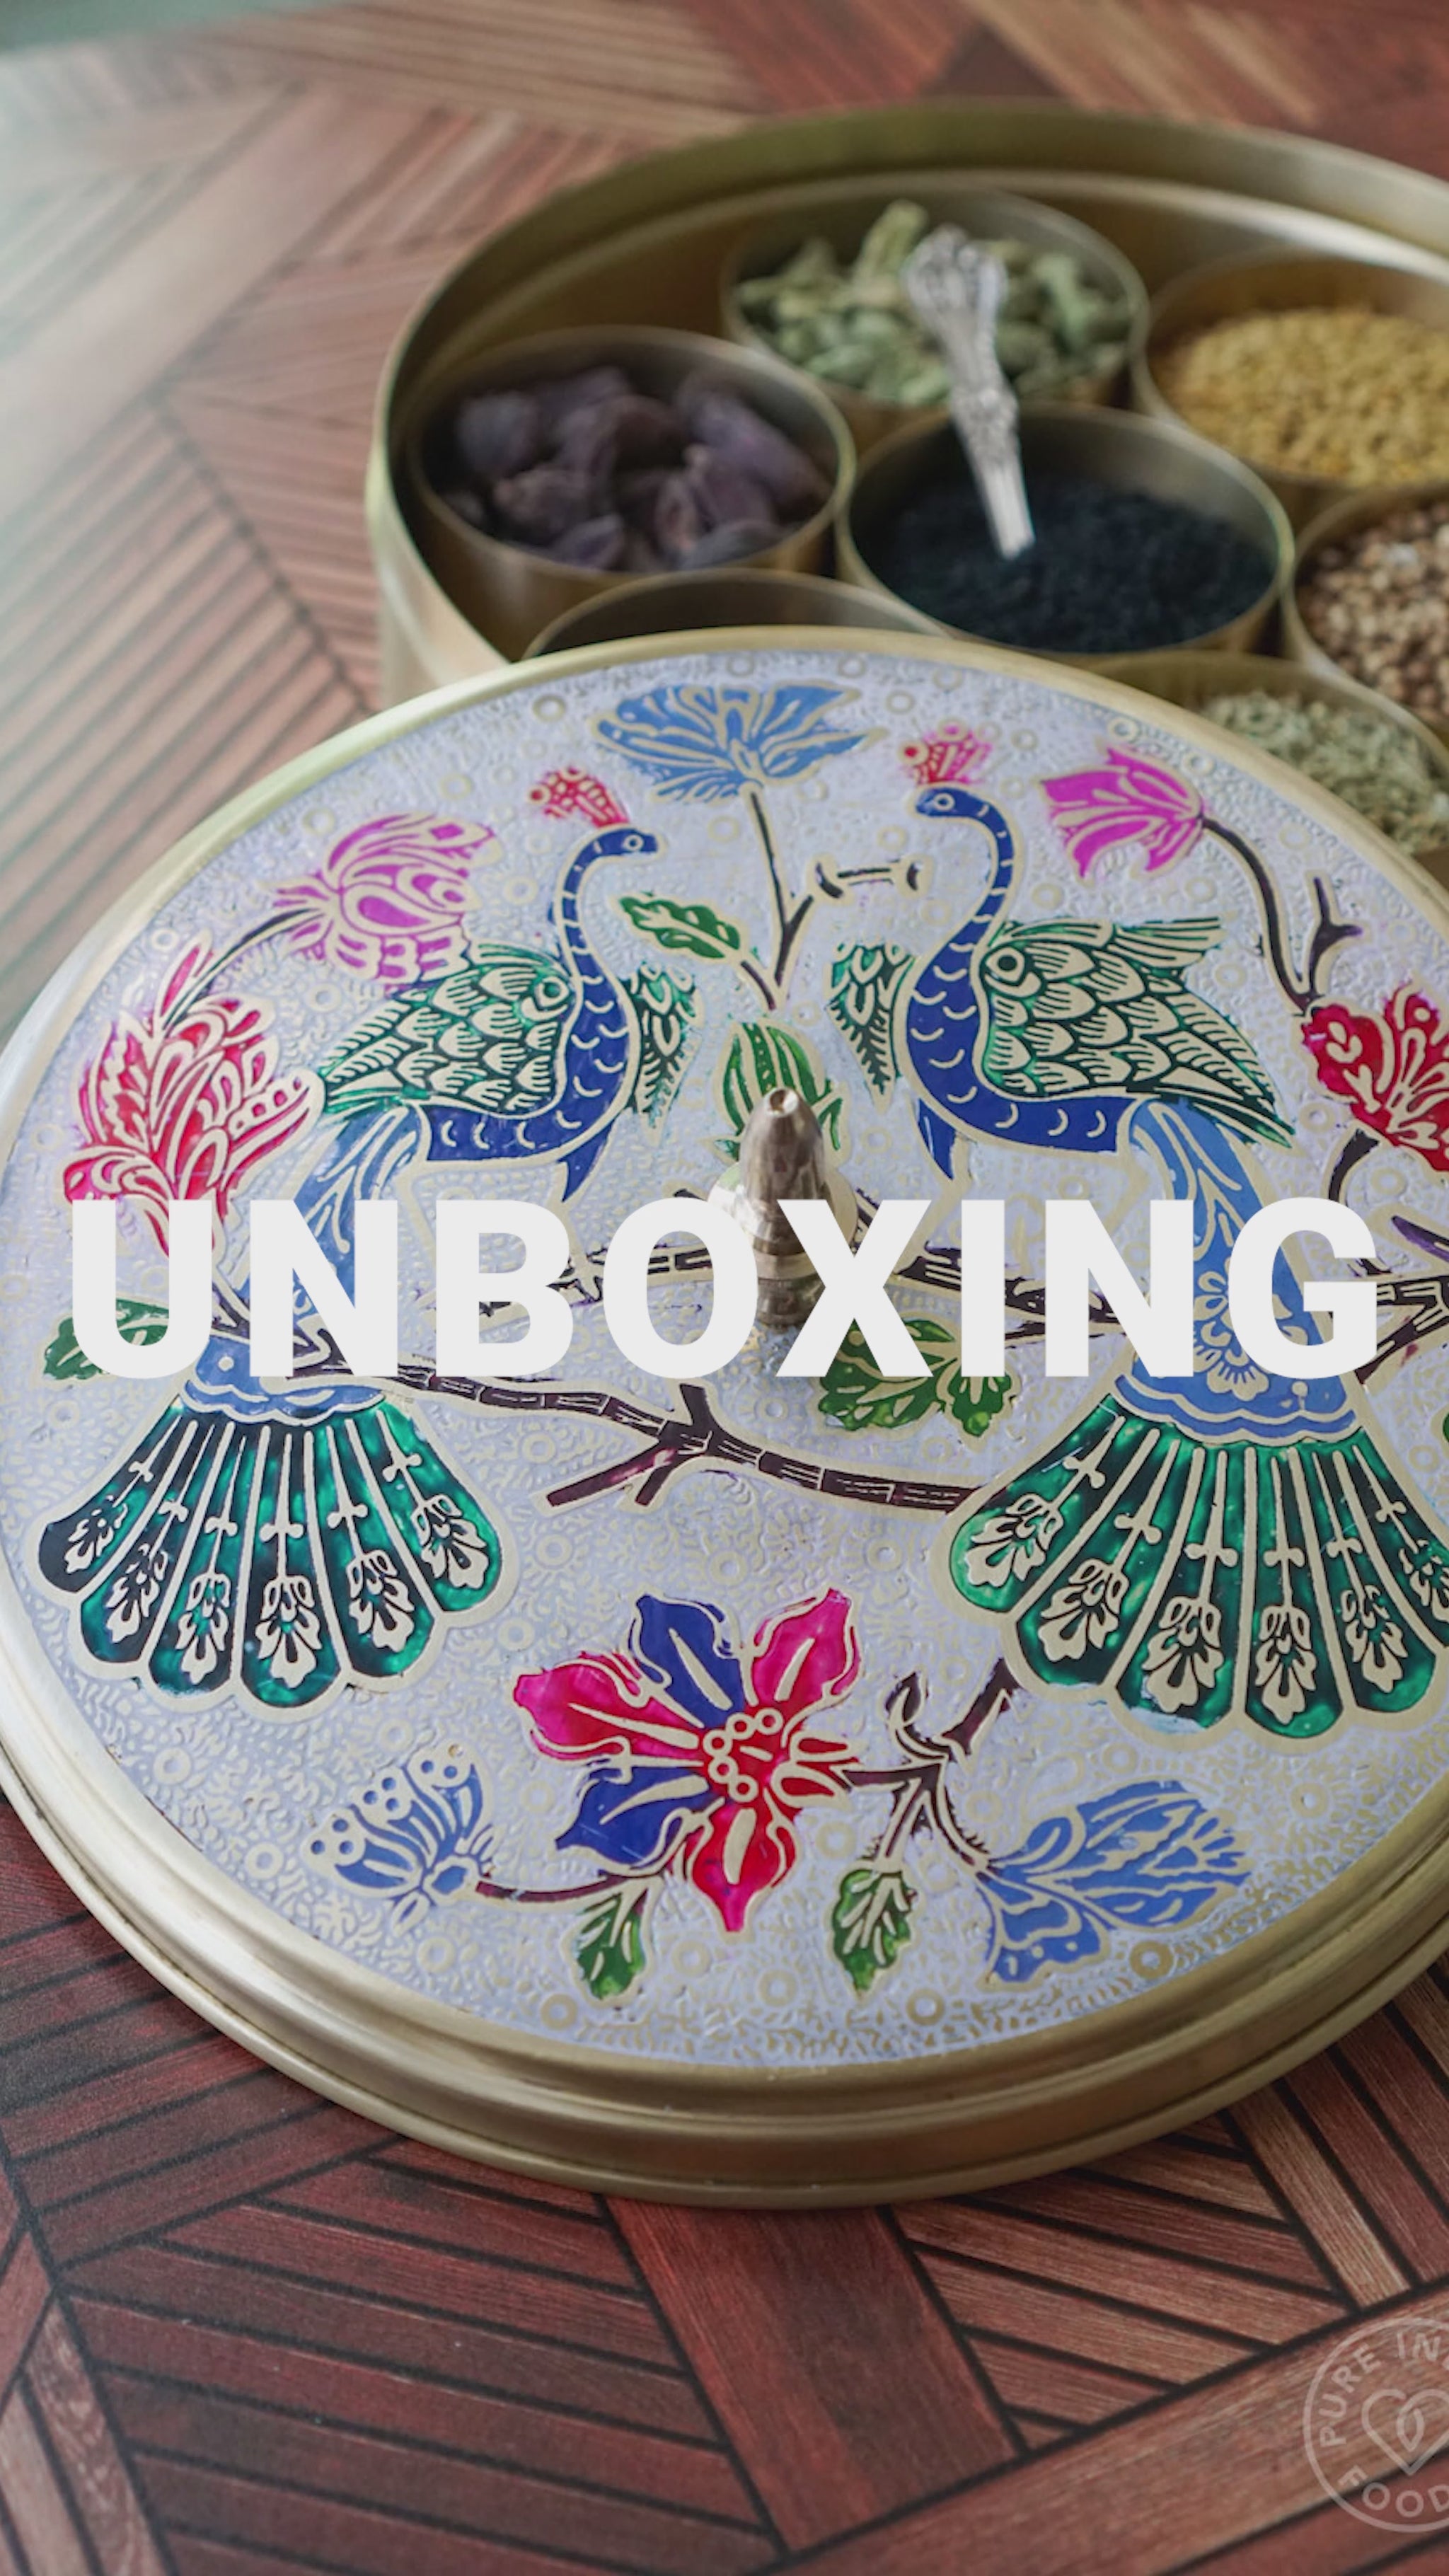 Unboxing video for the brass, handmade masala dabba.